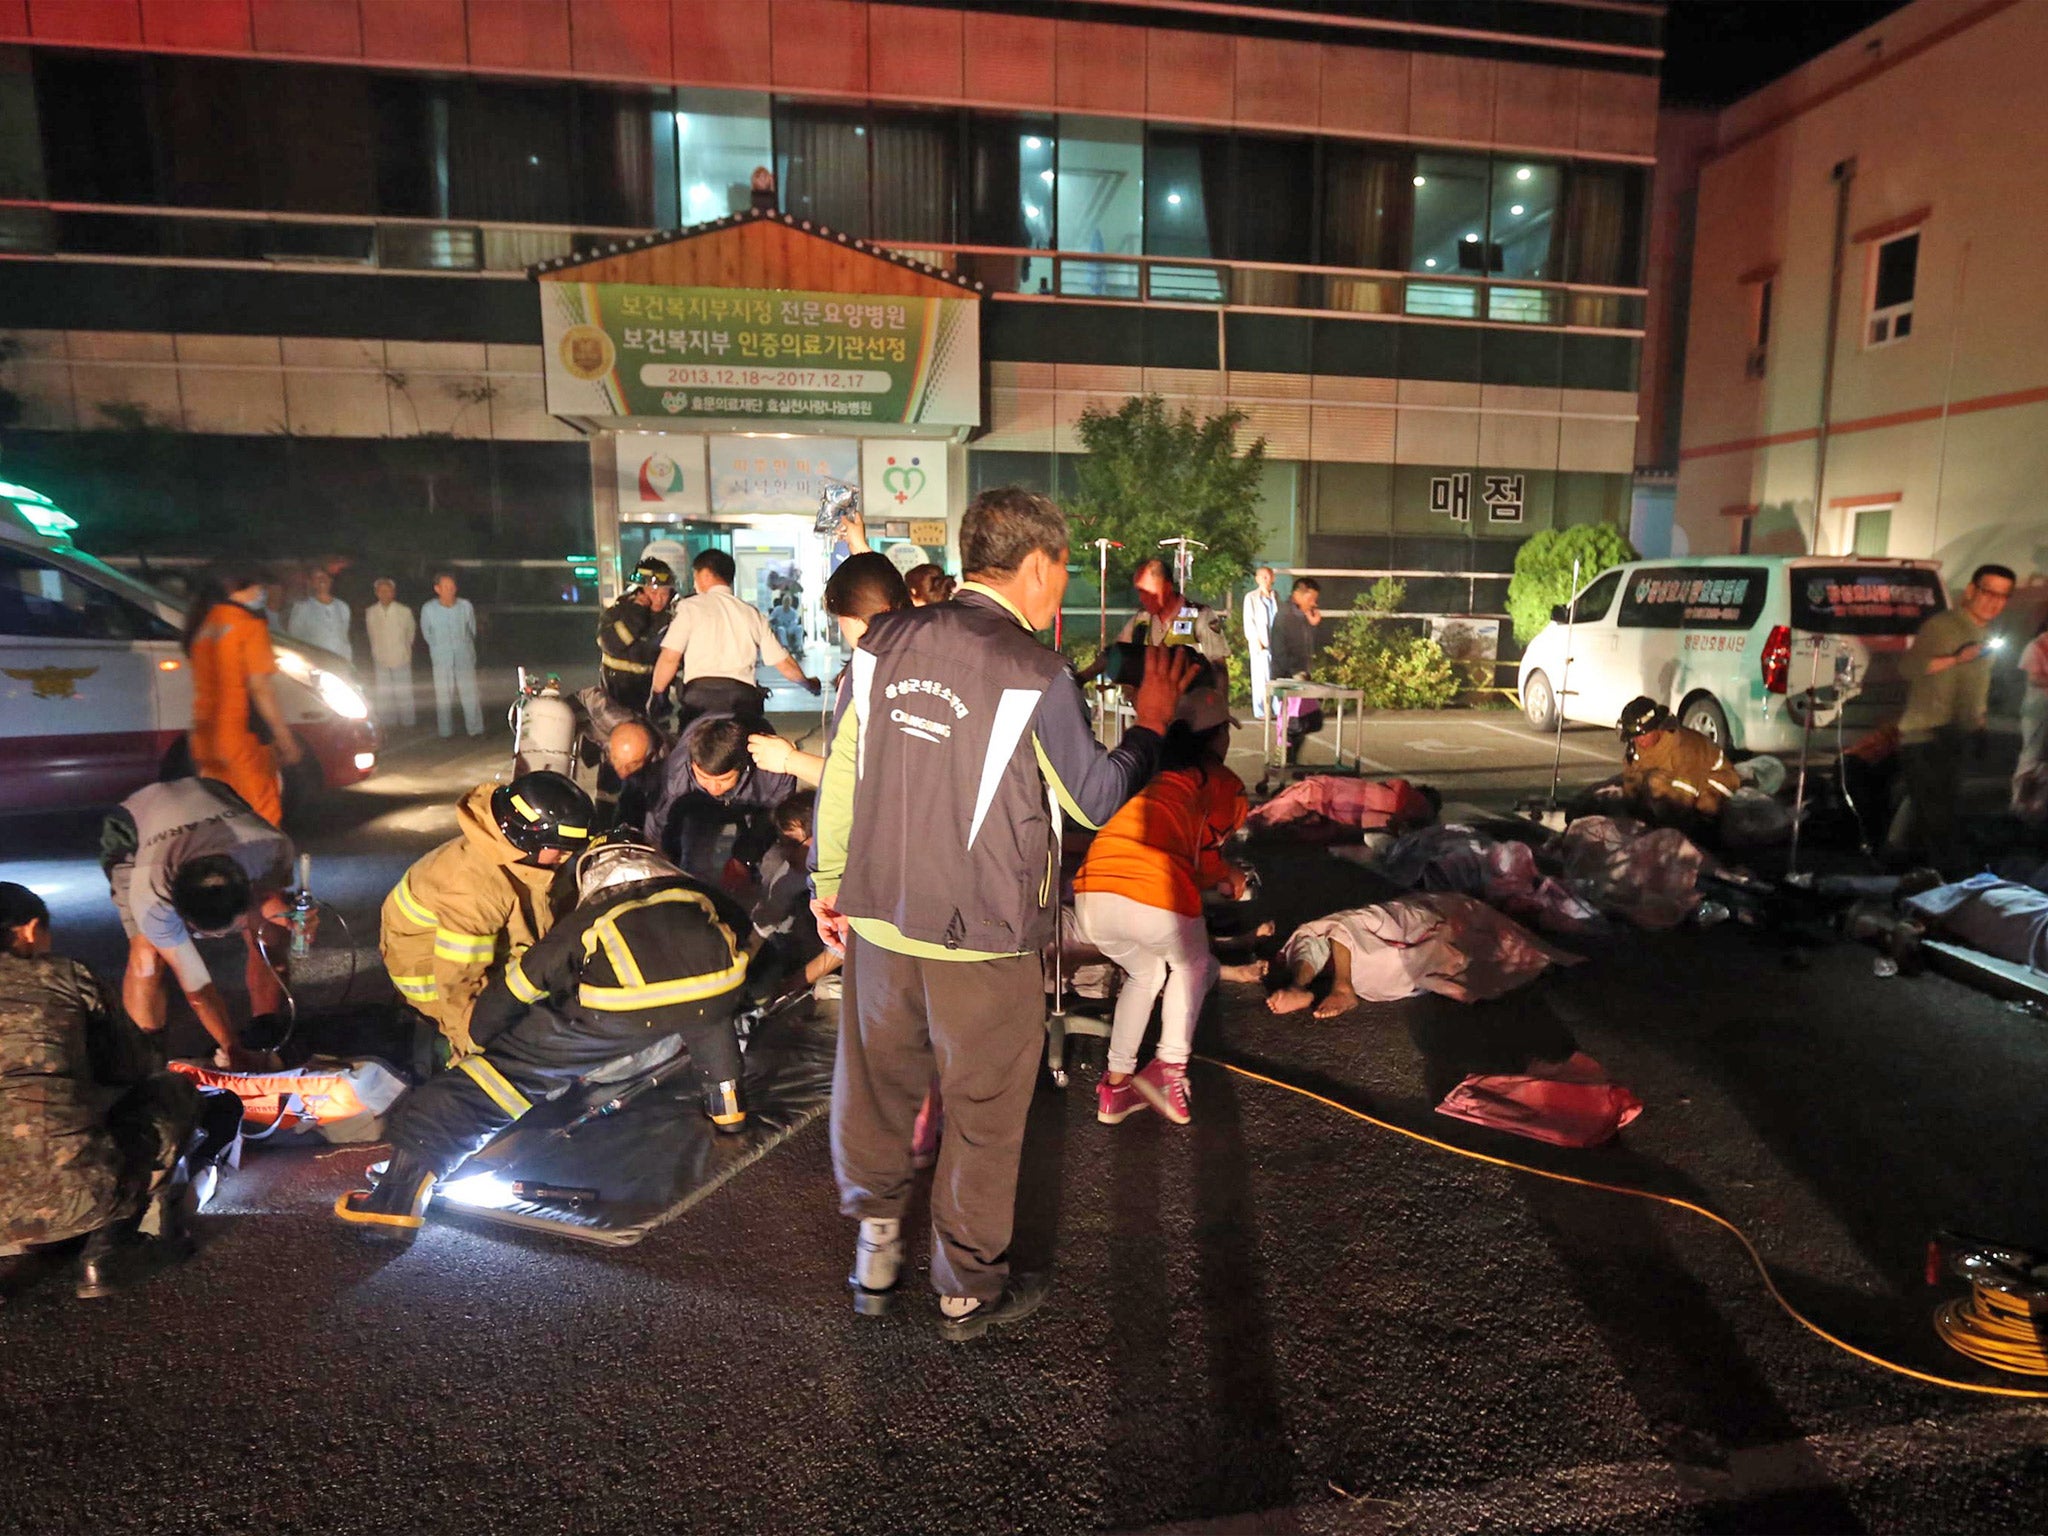 Firefighters rescue victims at a hospital in Jangseong, South Korea